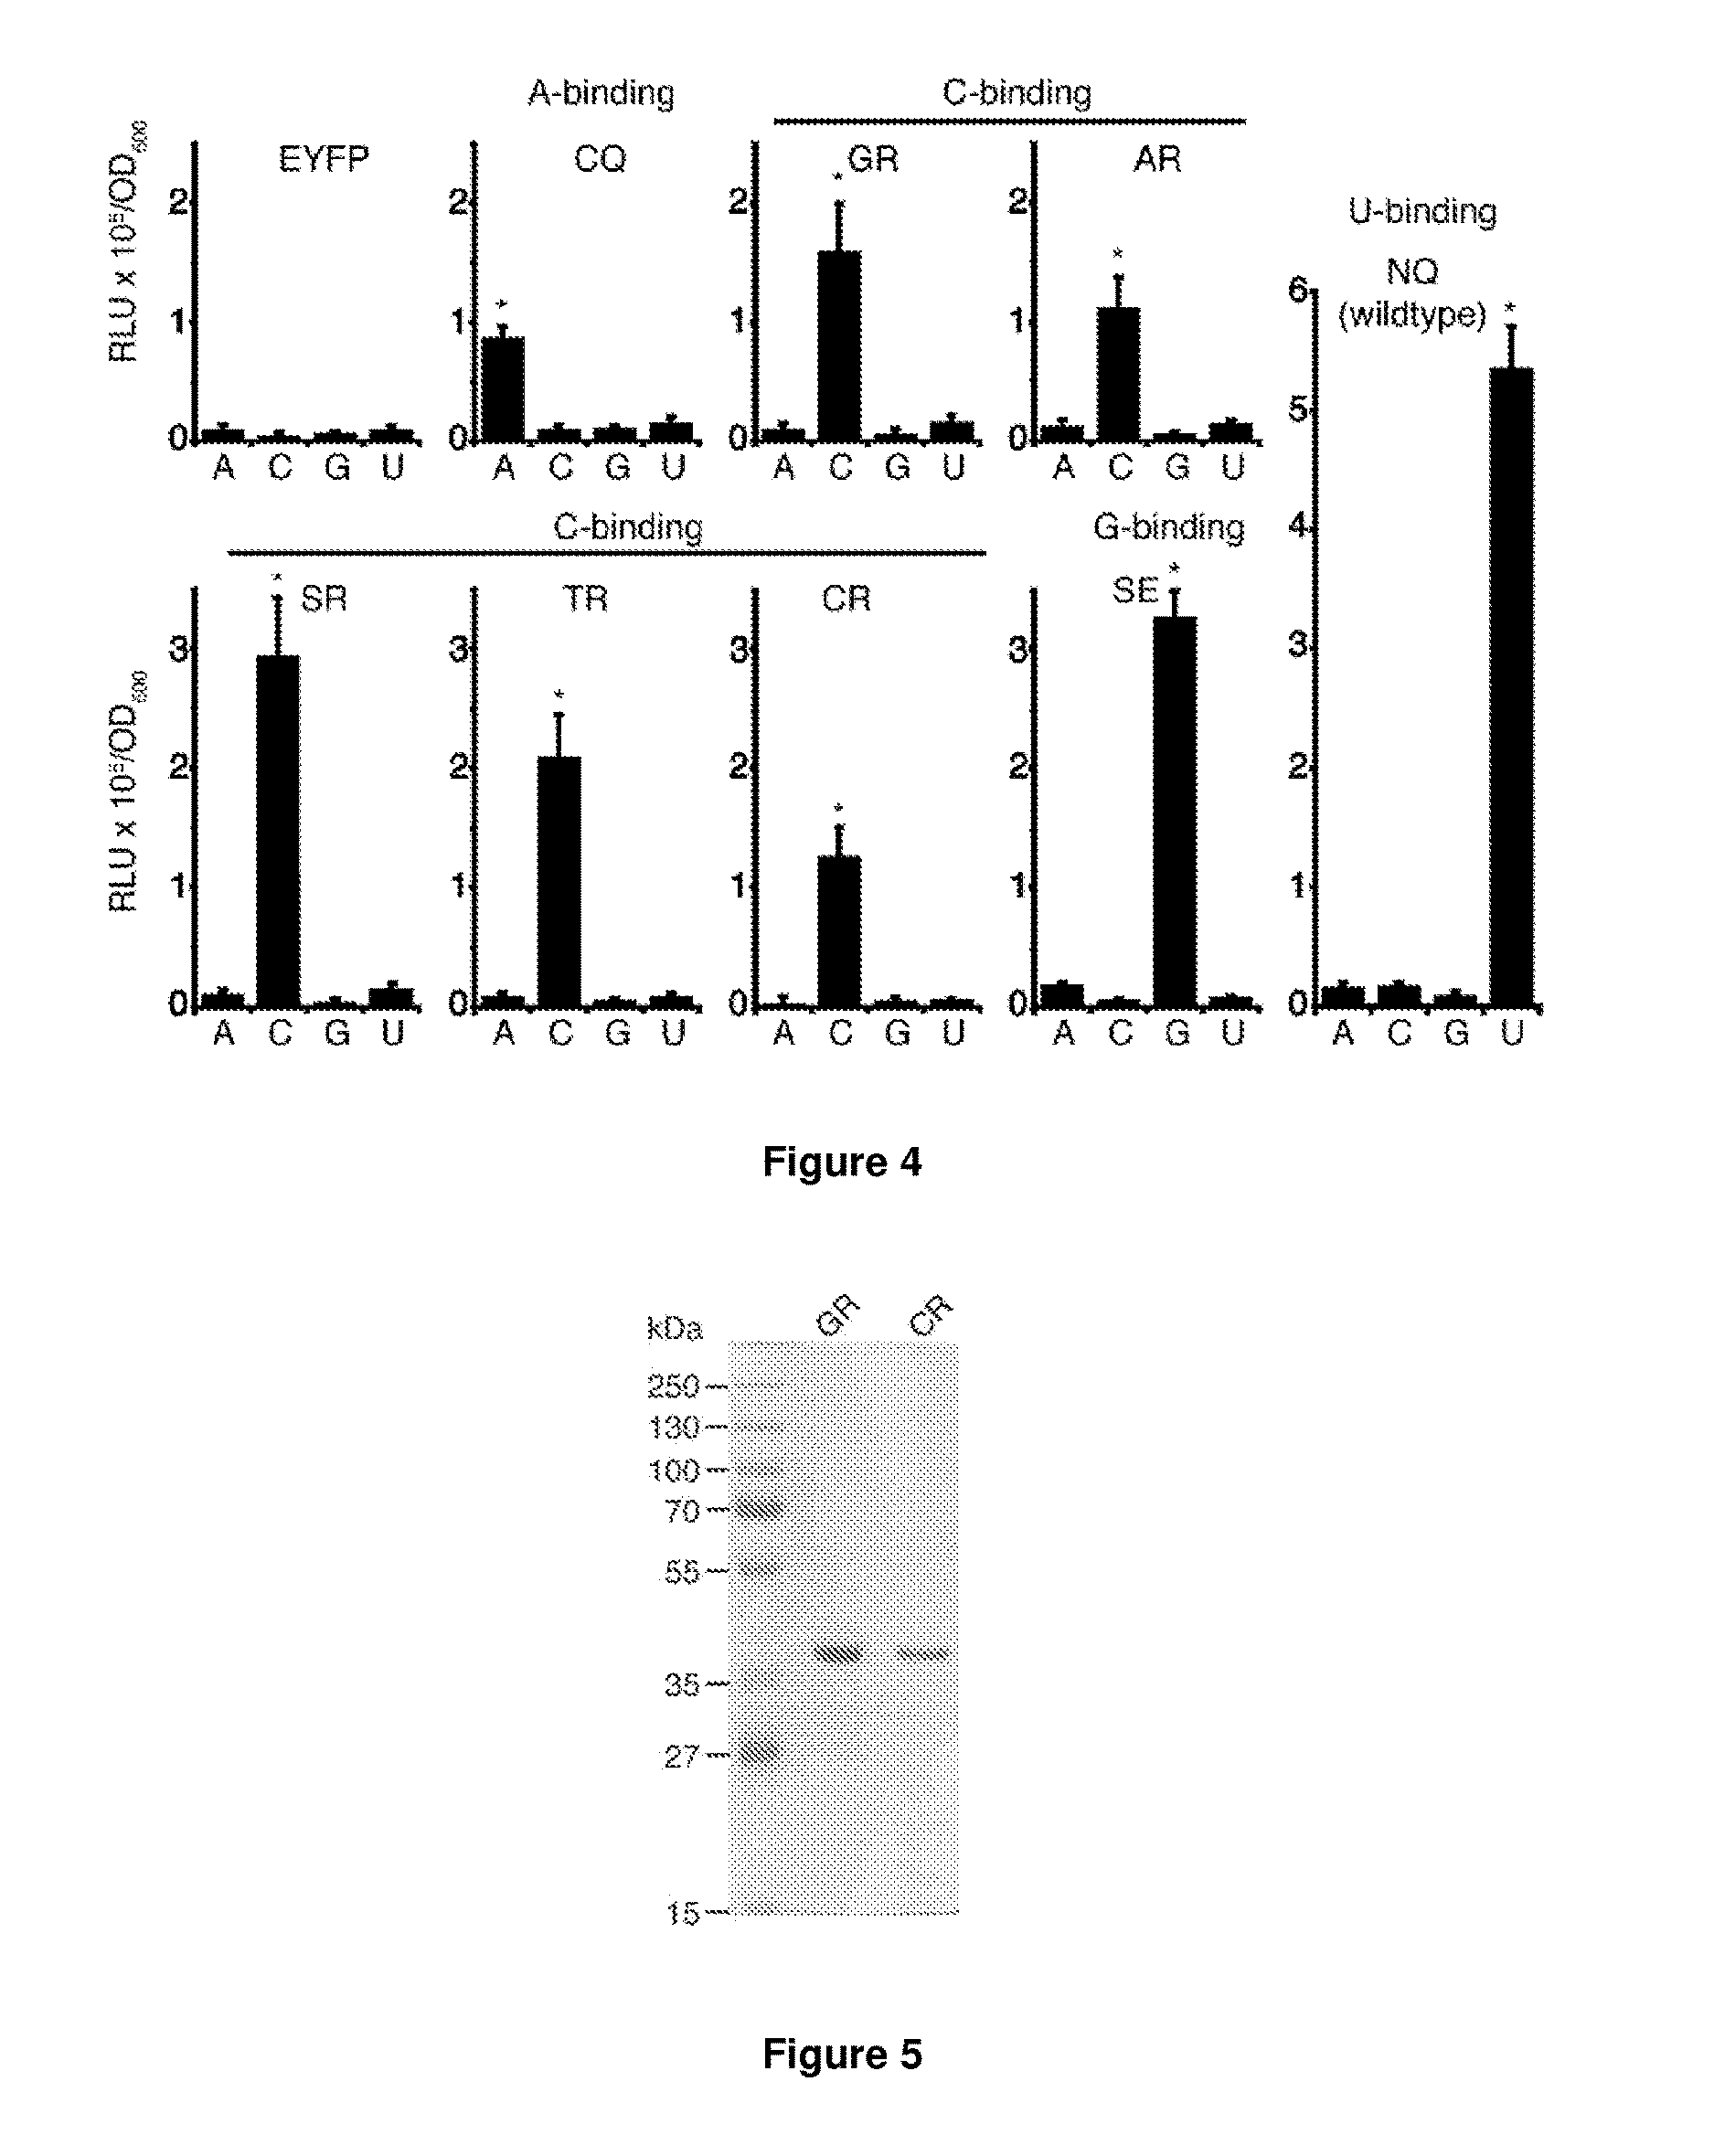 Peptides for the specific binding of RNA targets